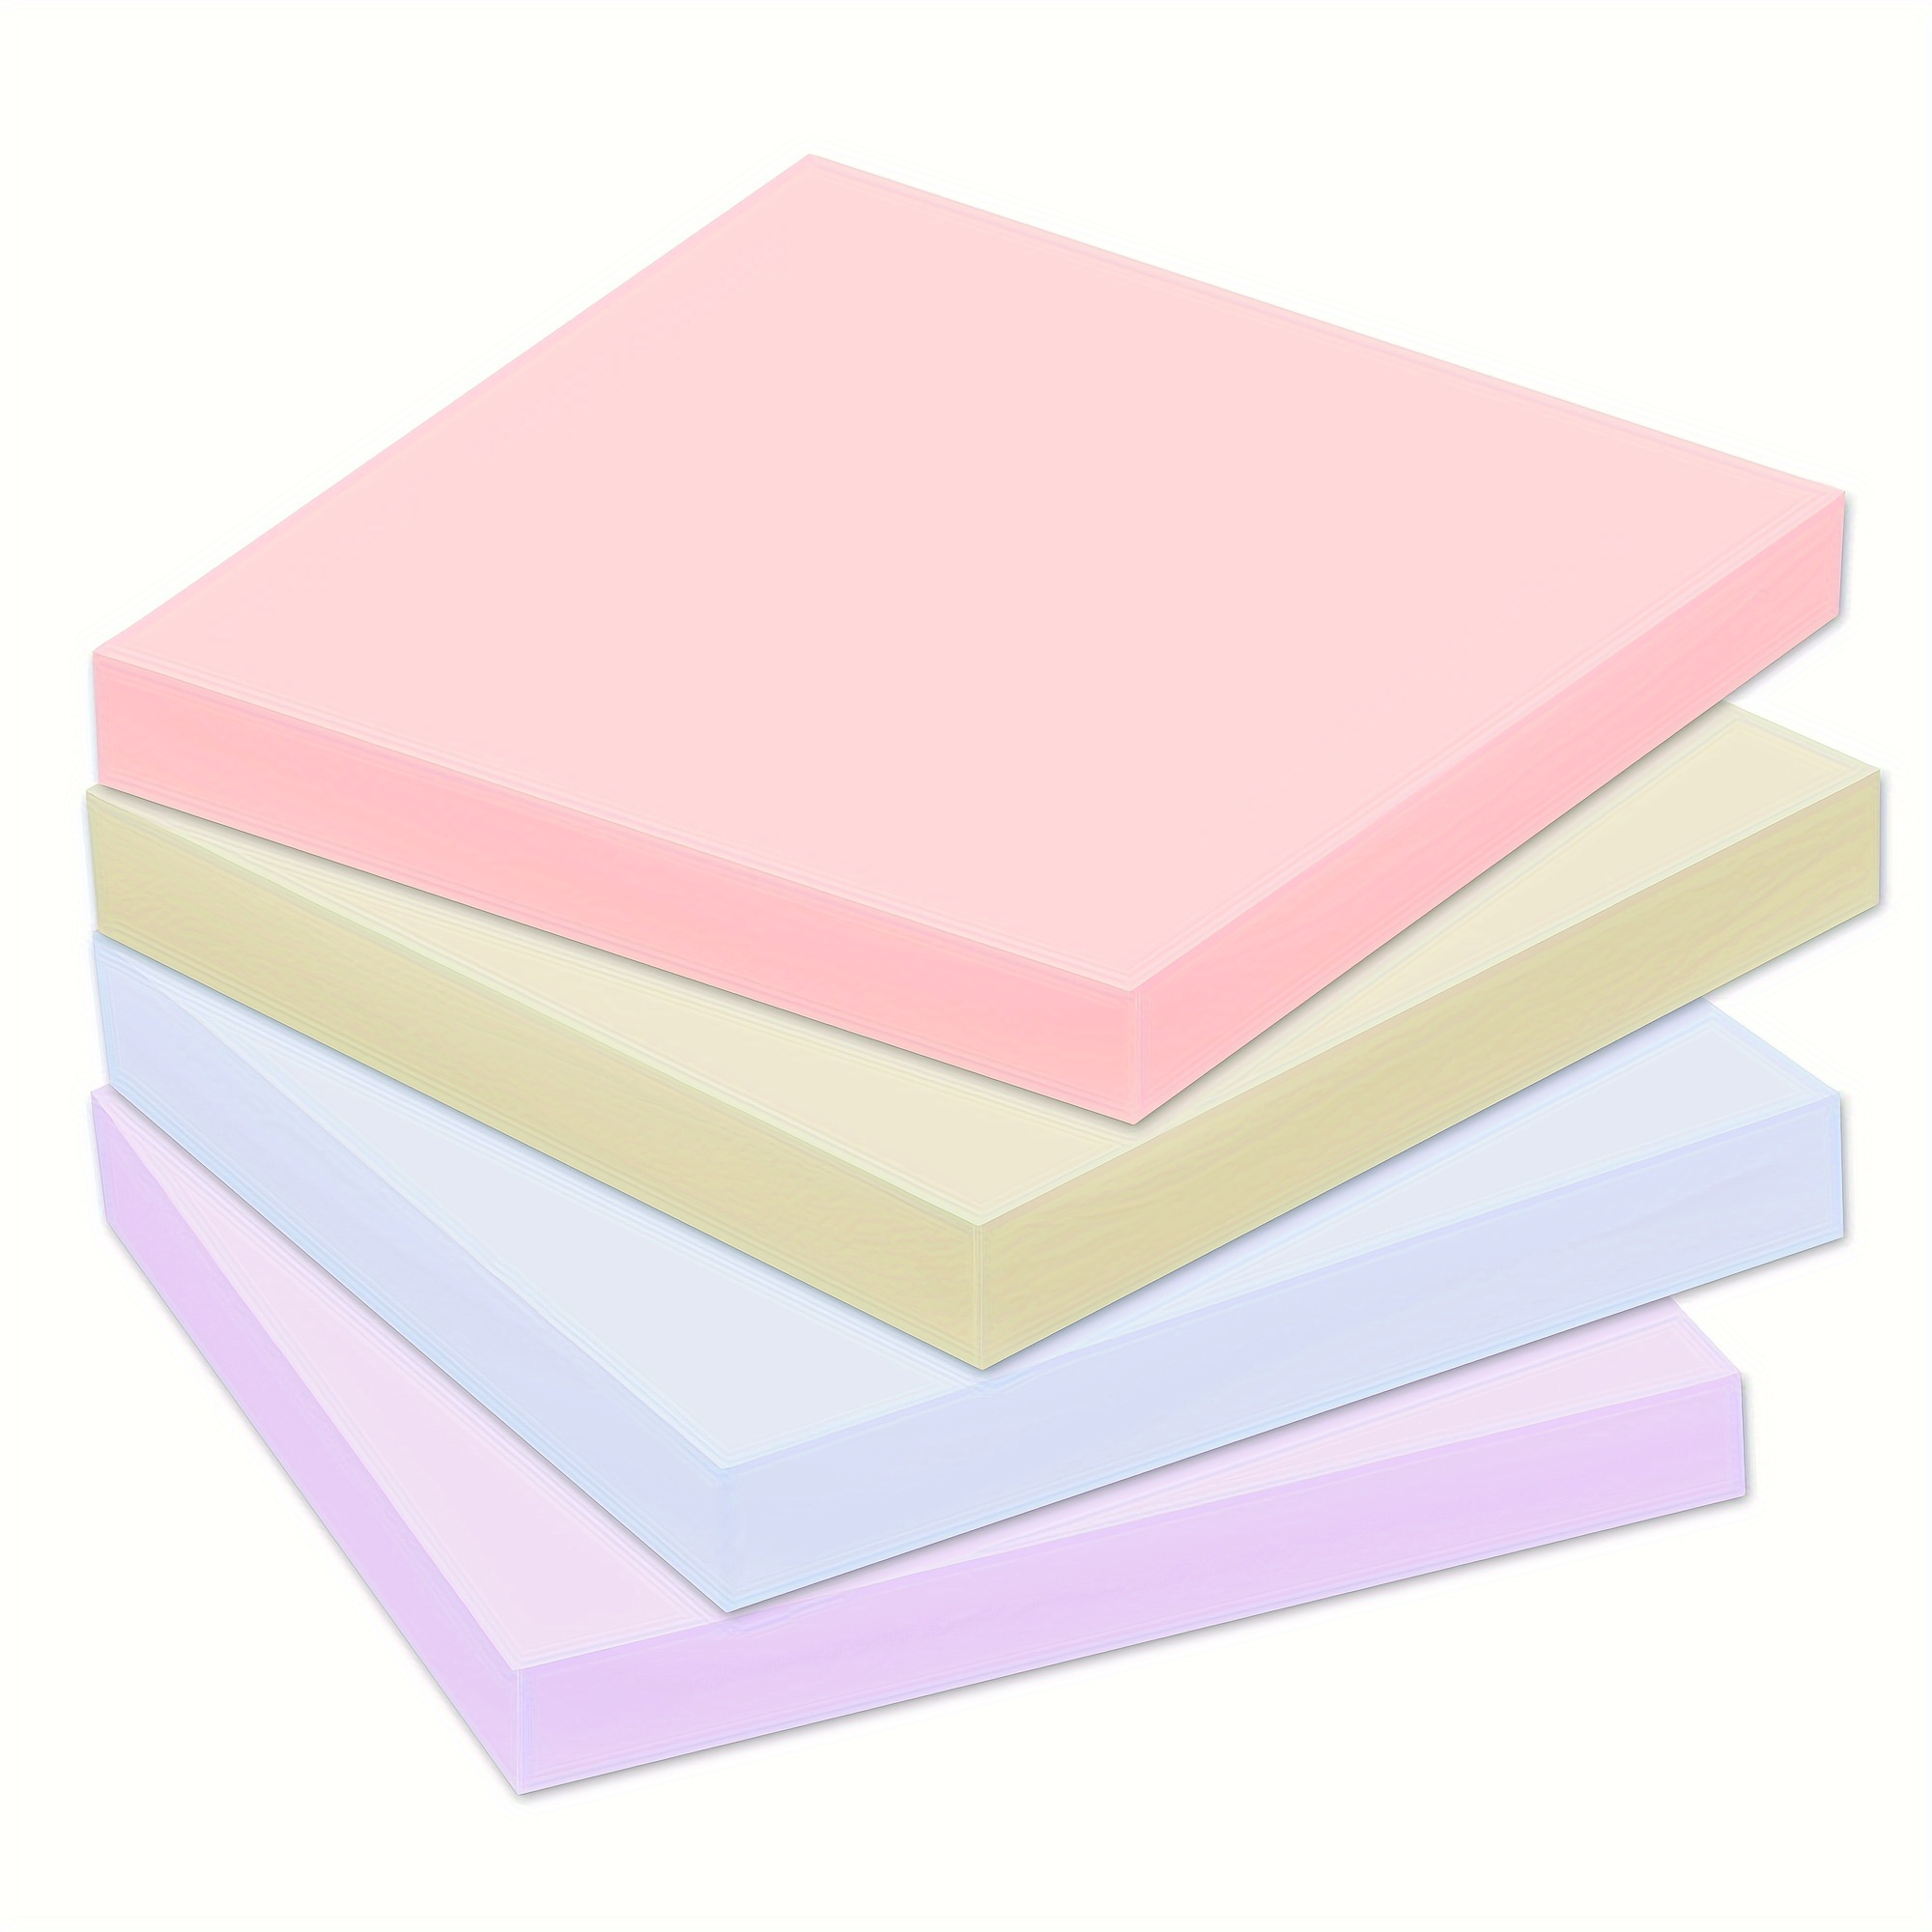 

4 Pads Pastel-colored Sticky Notes 3x3 Inches, Morandi Colors Self-stick Pads, Easy To Post For Home, Office, Notebook, 50 Sheets Per Pad